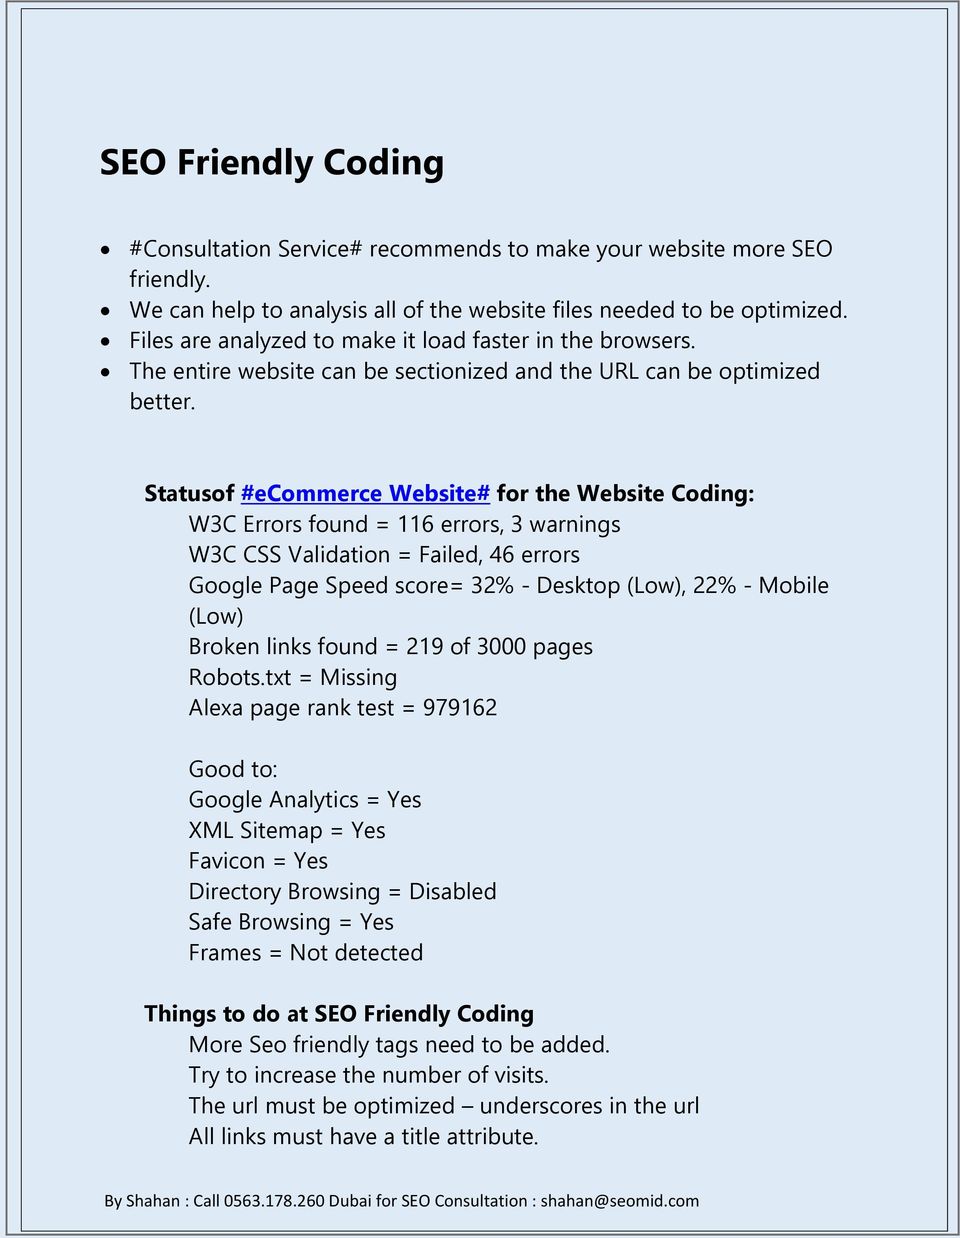 Statusof #ecommerce Website# for the Website Coding: W3C Errors found = 116 errors, 3 warnings W3C CSS Validation = Failed, 46 errors Google Page Speed score= 32% - Desktop (Low), 22% - Mobile (Low)